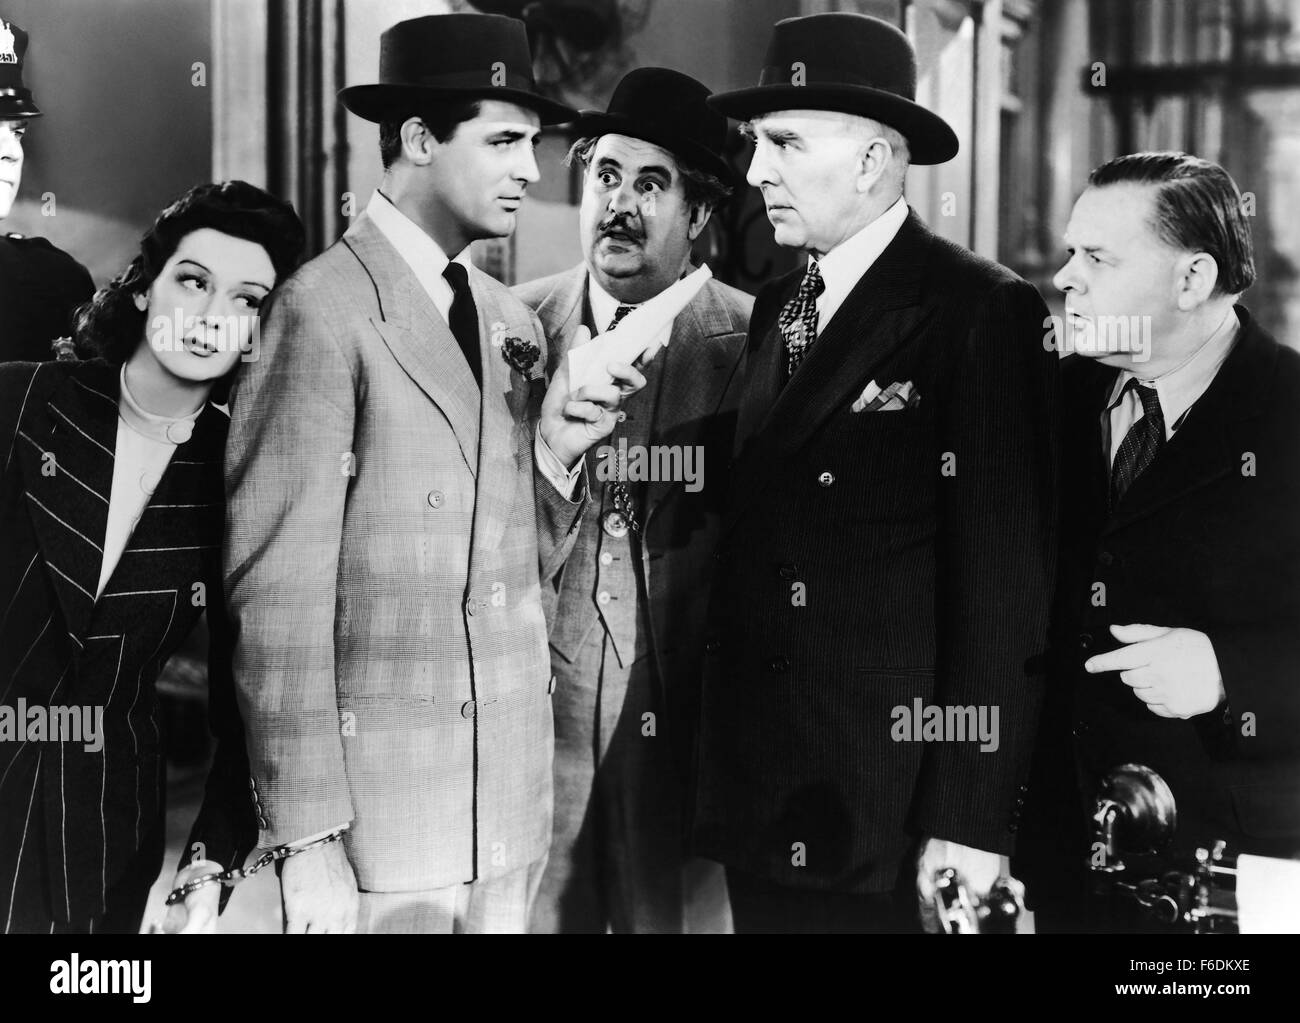 RELEASED: Jan 11, 1940 - Original Film Title: His Girl Friday. PICTURED: CARY GRANT, ROSALIND RUSSELL,  BILLY GILBERT, CLARENCE KOLB, GENE LOCKHART. Stock Photo